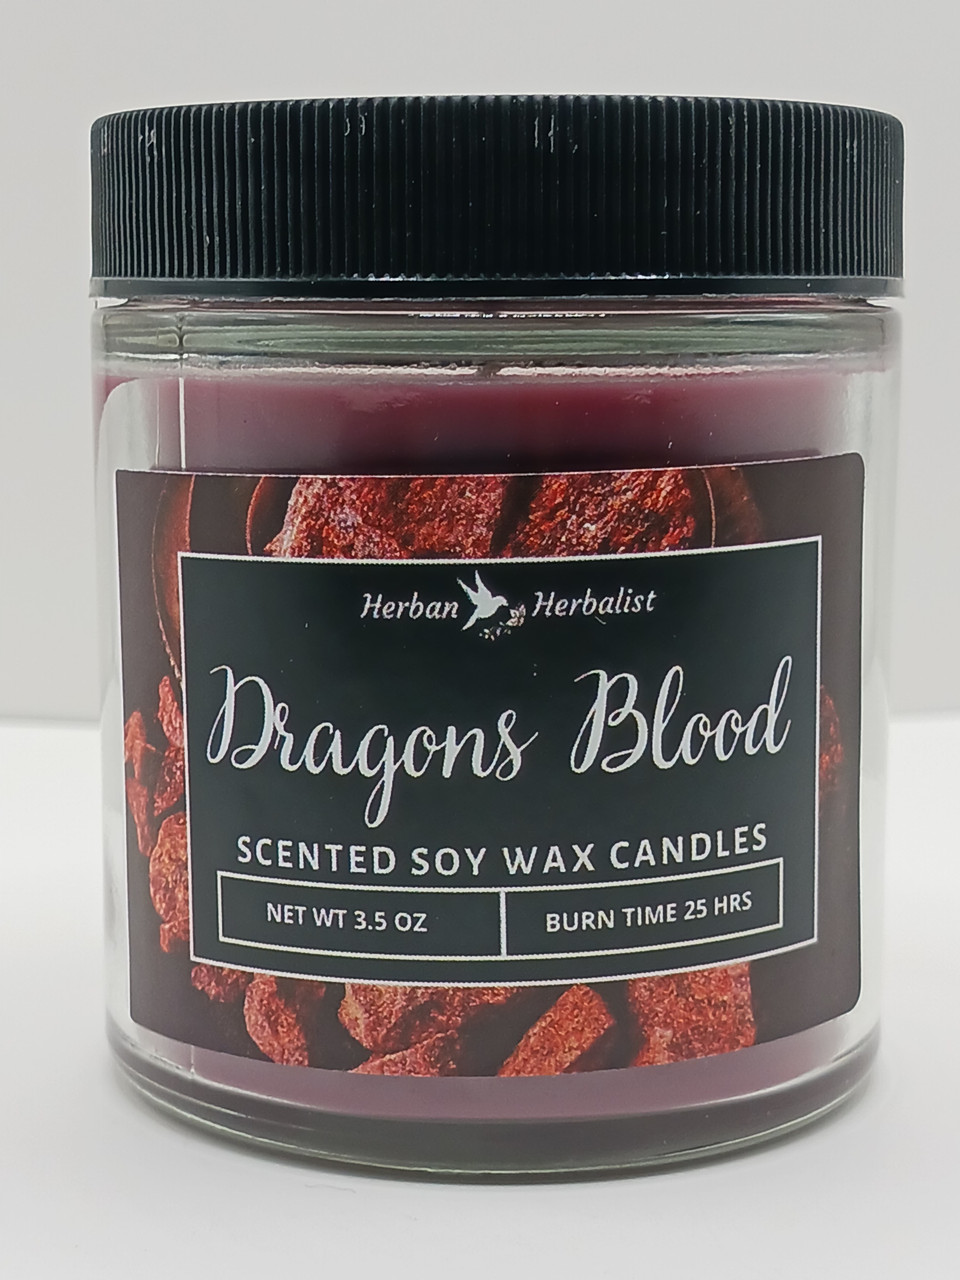 Dragons Blood Soy Wax Candle: Experience the Alluring Aroma